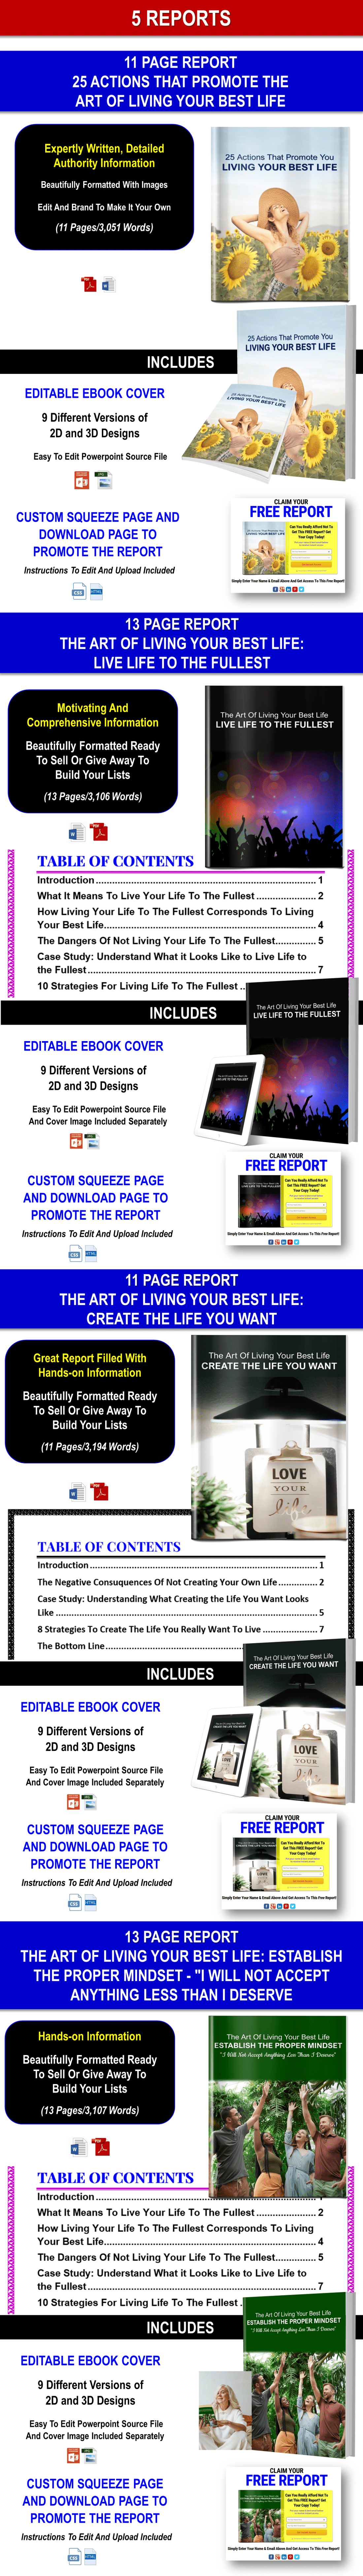 Art Of Living Your Best Life Content With PLR Rights